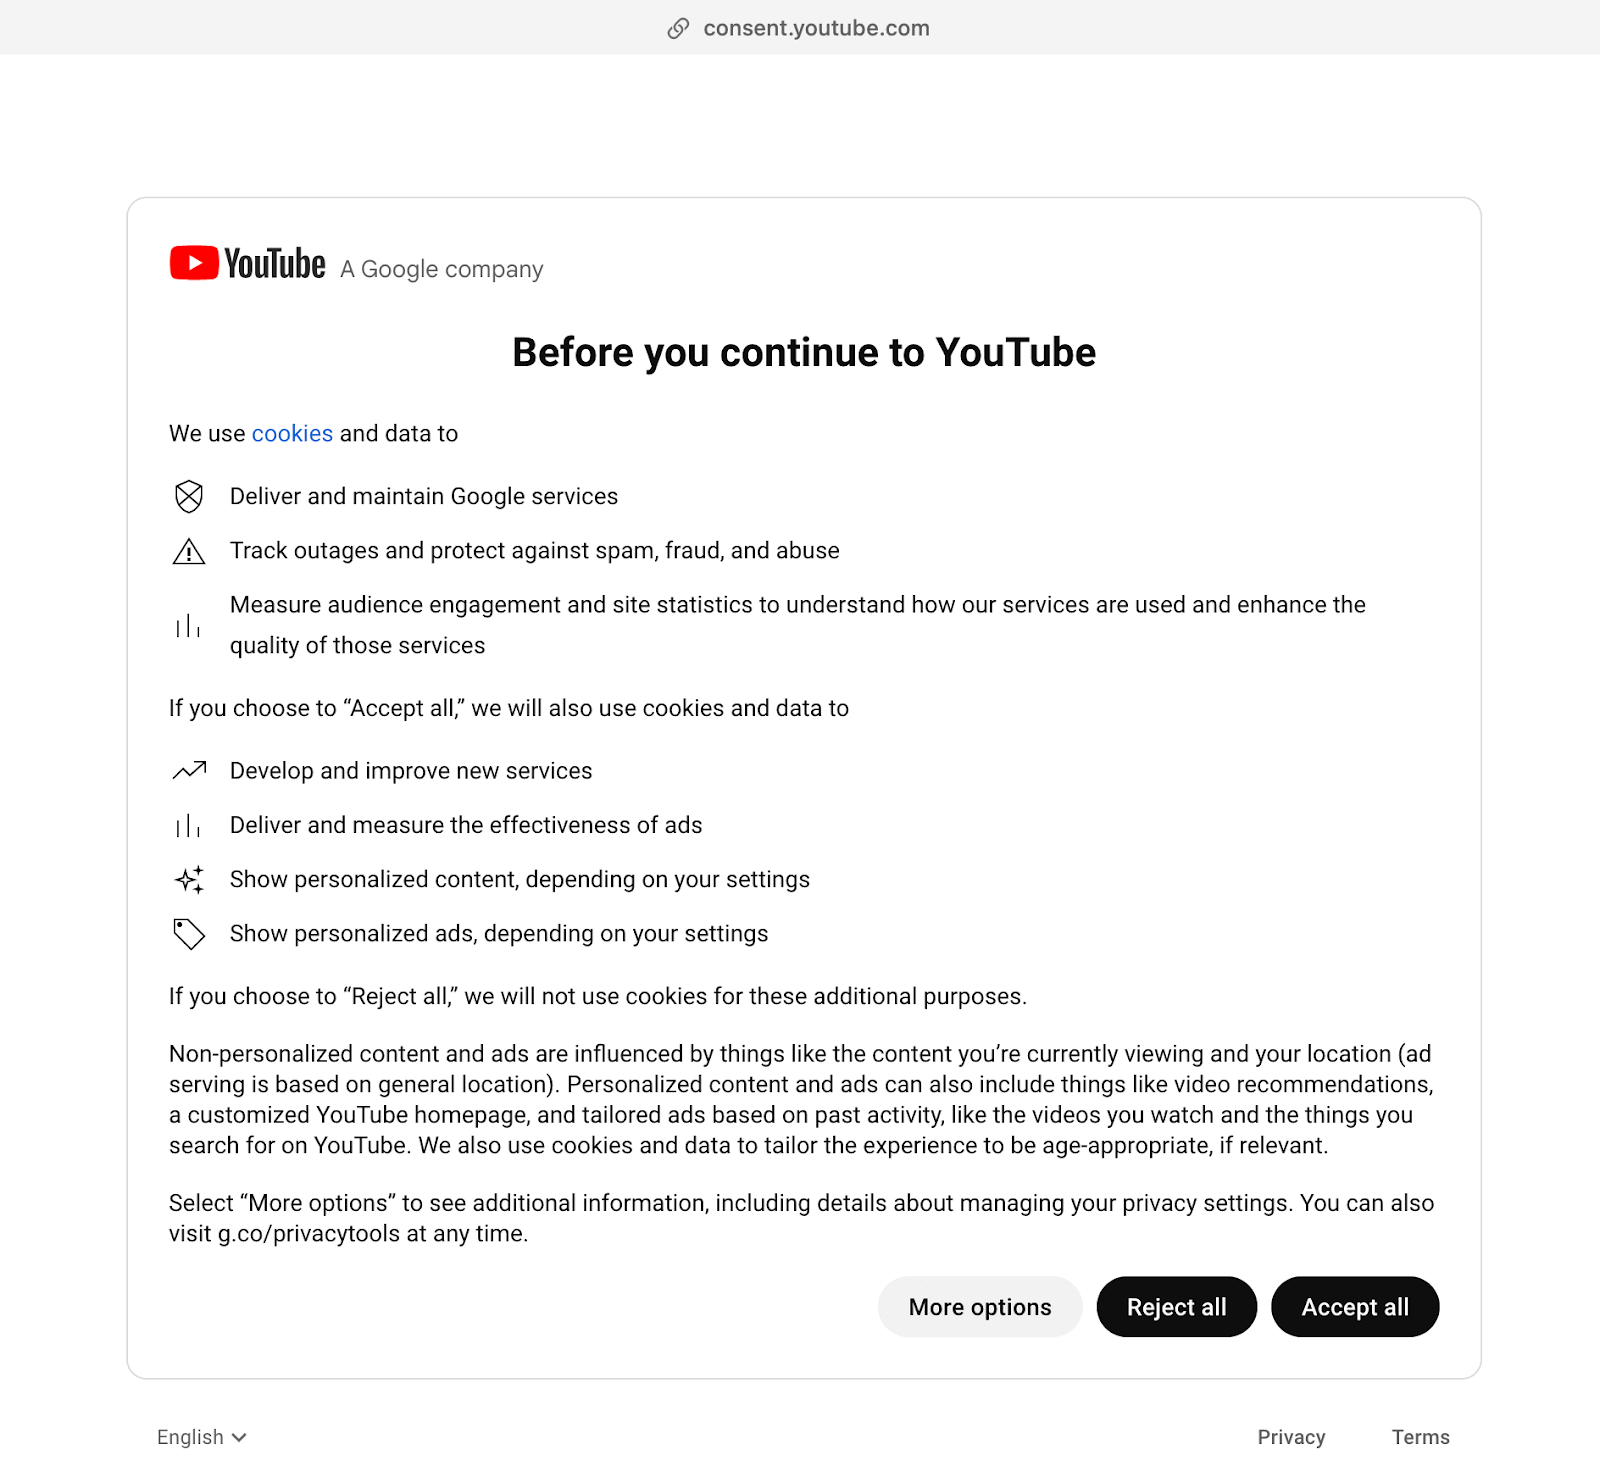 Scraping YouTube content is legal